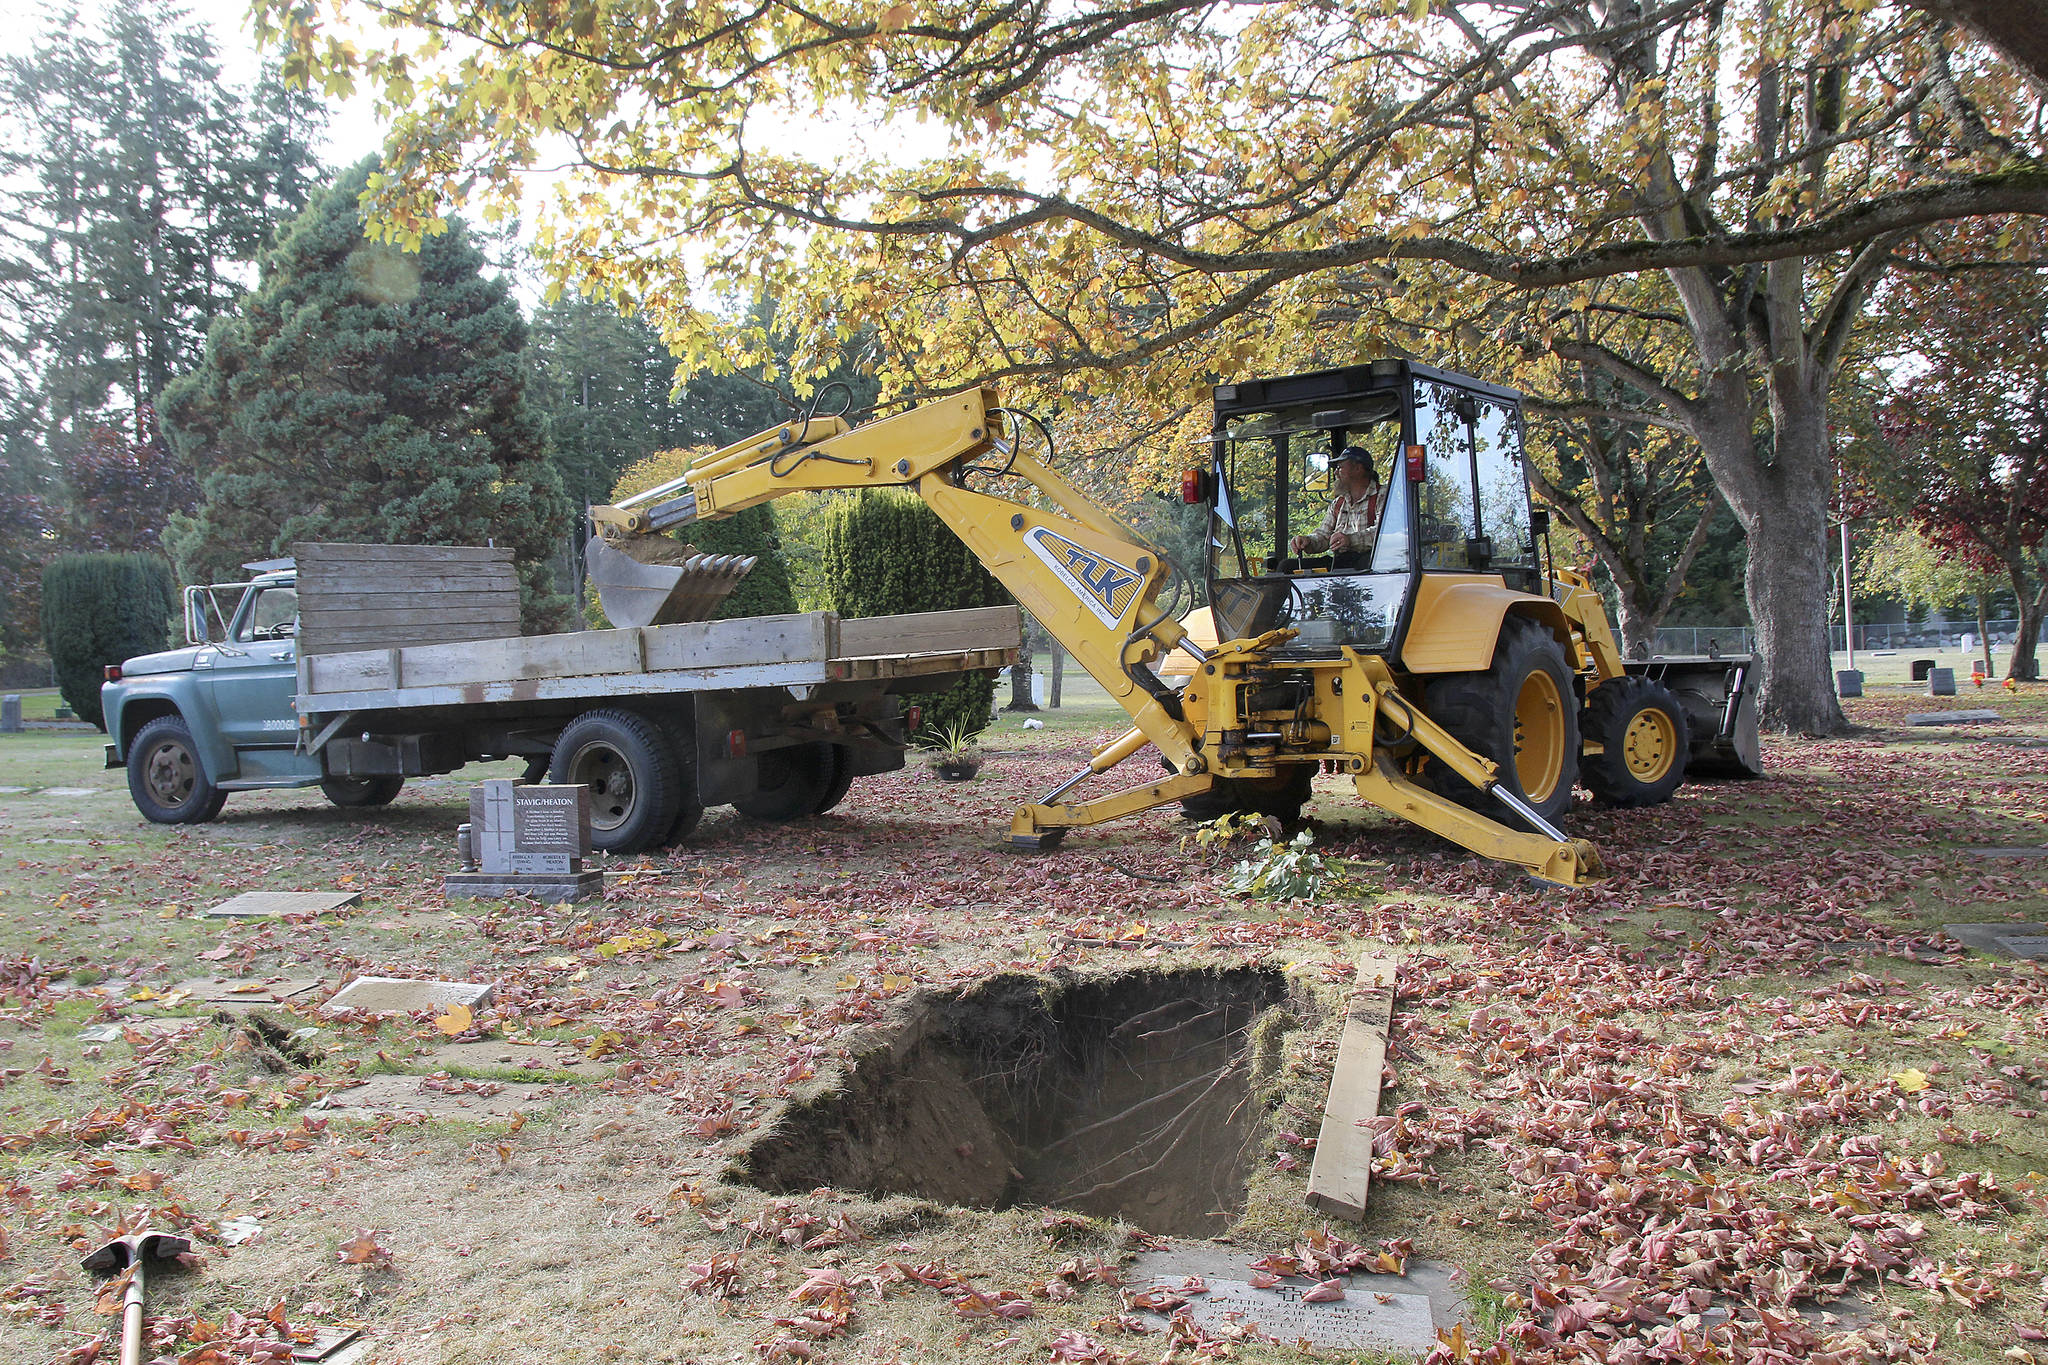 Jessie Stensland / Whidbey News-Times                                Mike Case Smith digs a grave with a backhoe in Oak Harbor’s Maple Leaf Cemetery this week.